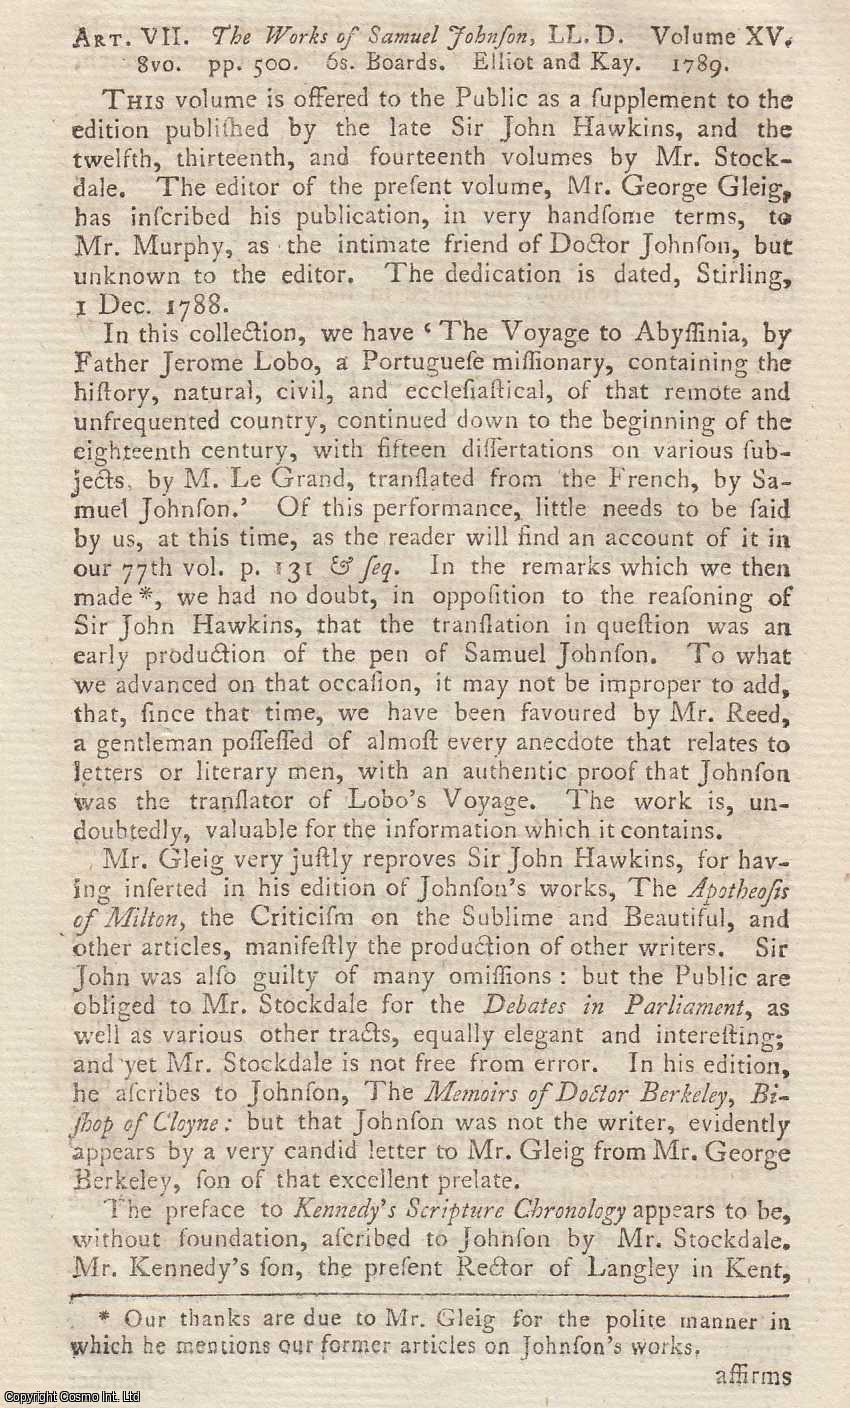 Author Not Stated - The Works of Samuel Johnson, LL.D. An original article from the Monthly Review; or, Literary Journal, 1790.